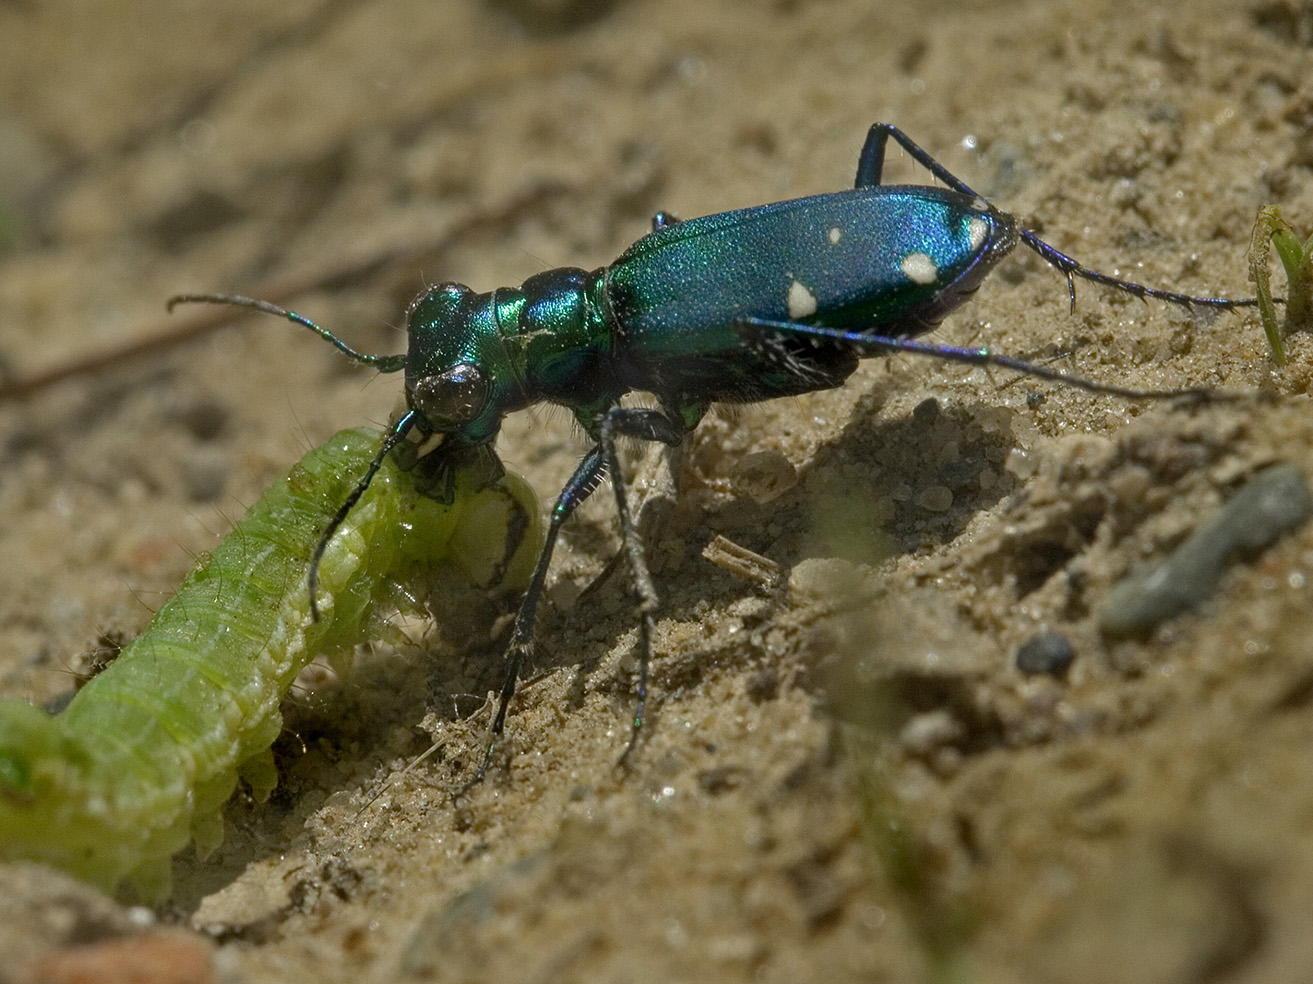 Fig. 10. Six-spotted tiger beetle adult attacking a caterpillar.